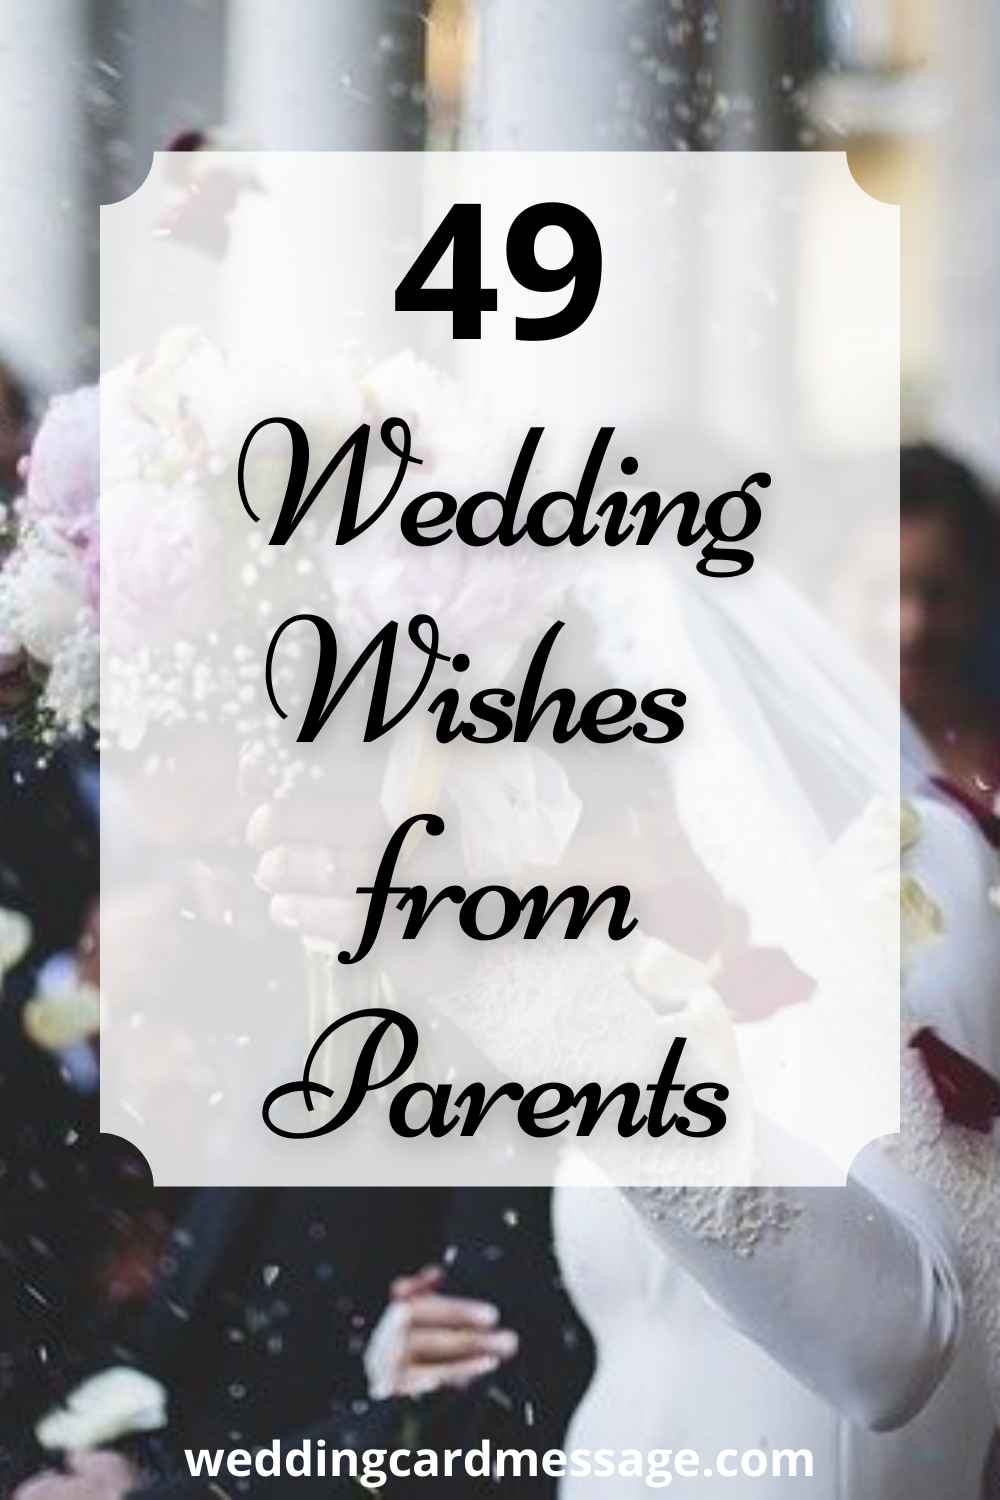 wedding messages from parents Pinterest